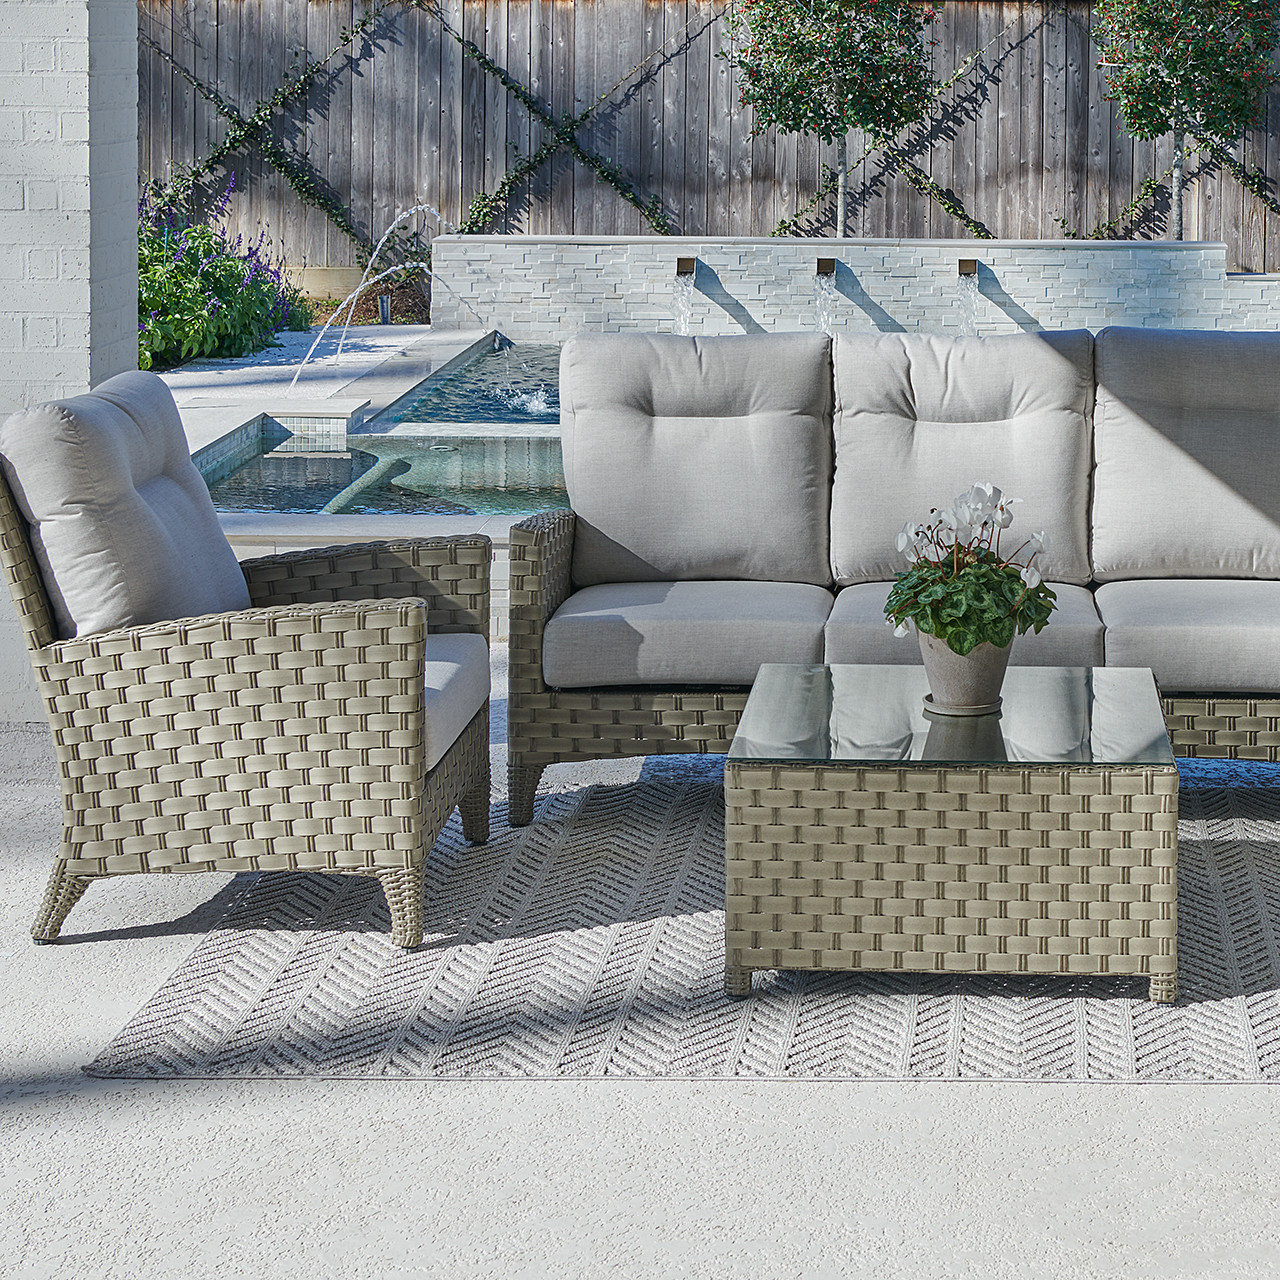 Gramercy Sea Grey Outdoor Wicker with Cast Silver Cushions 3 Piece Sofa Set + 32 in. Sq. Coffee Table